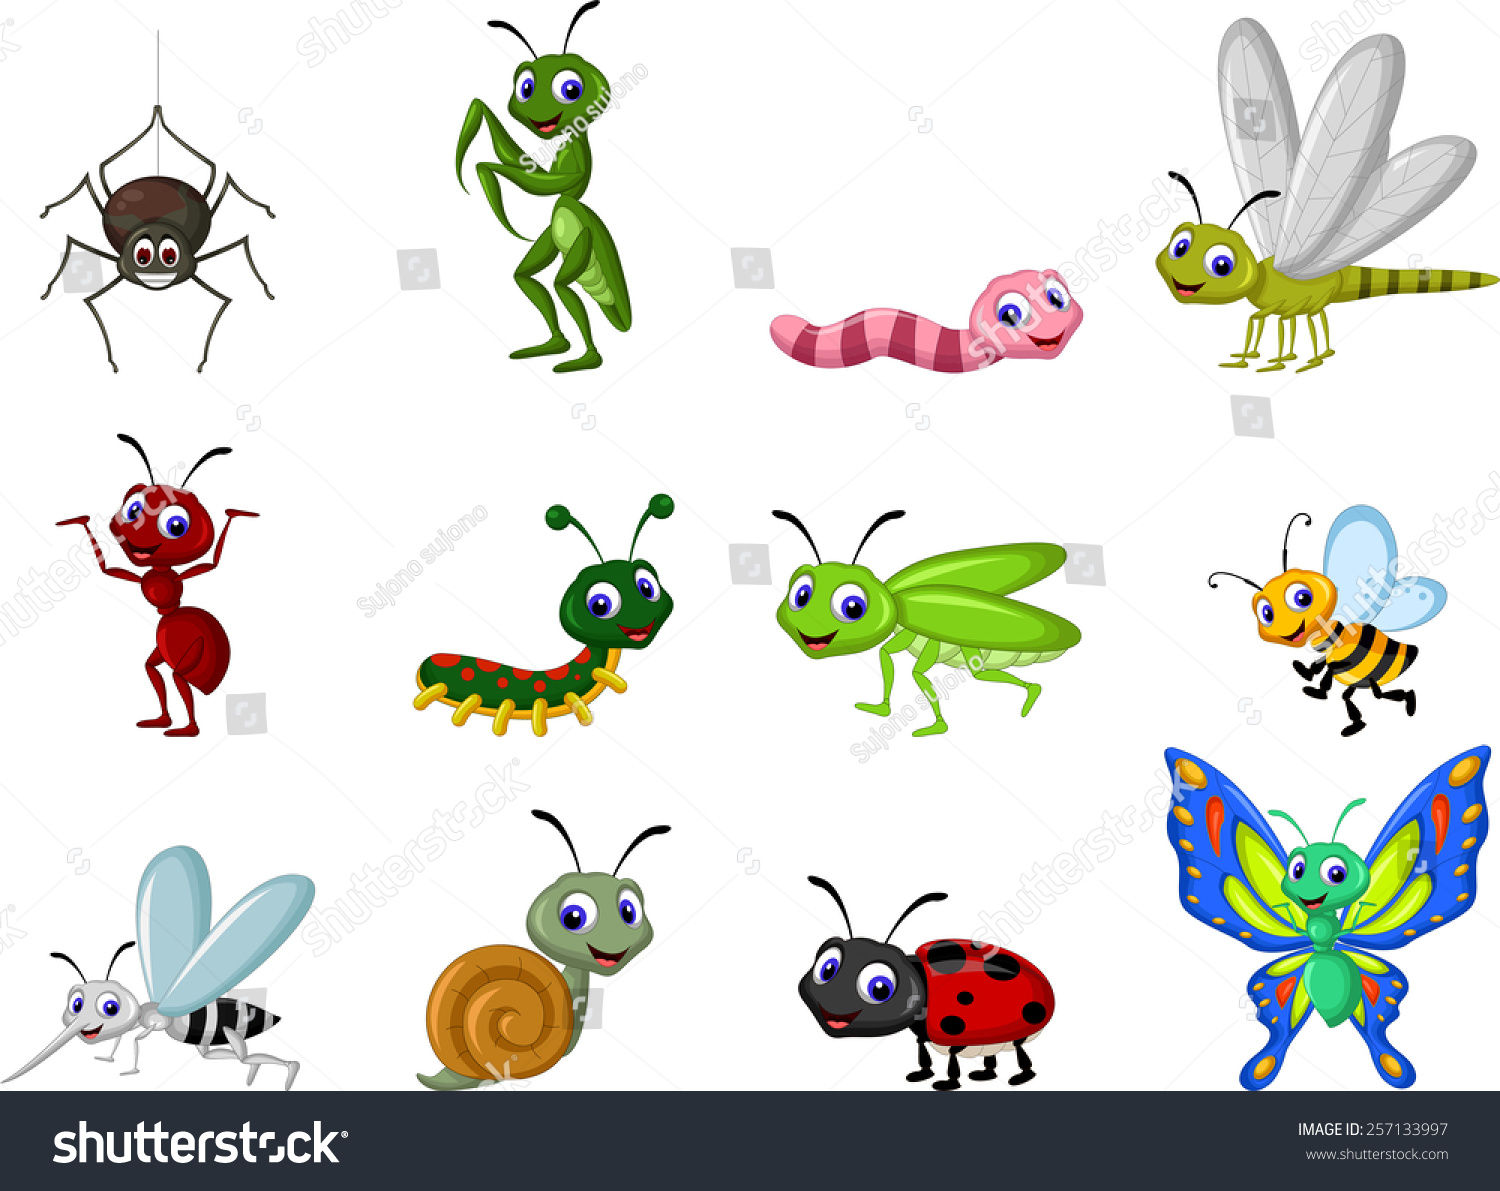 cartoon insect clipart - photo #42